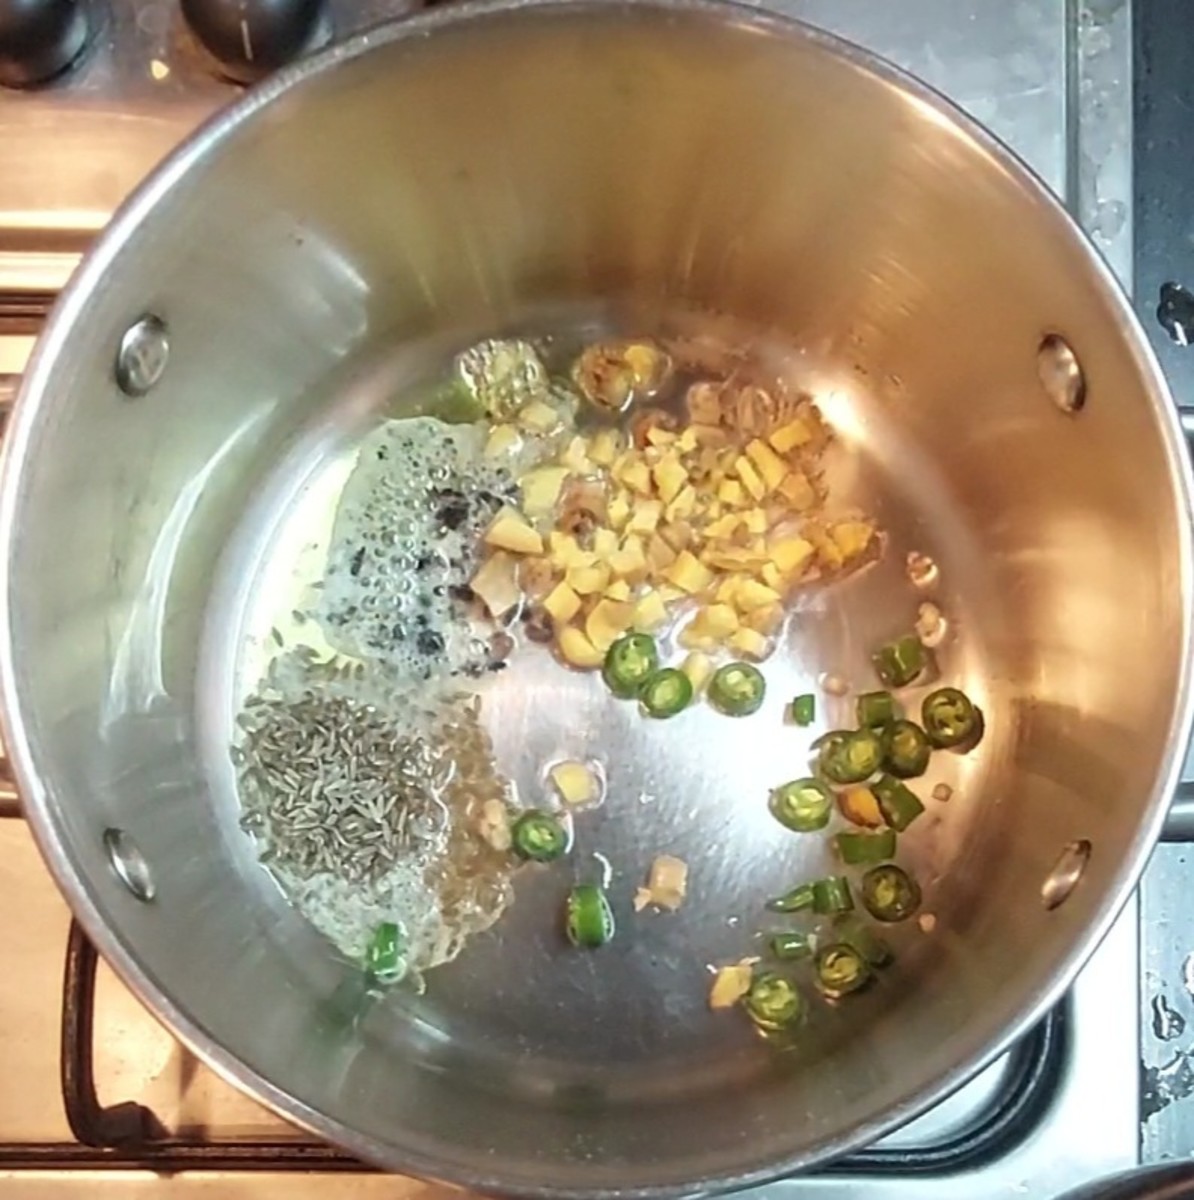 In a pan, heat 1 teaspoon ghee and 1 teaspoon oil. Splutter 1 teaspoon cumin seeds. Add 1/2 teaspoon coarsely crushed black pepper, 2 inches long chopped ginger, 1-2 chopped green chilies and a sprig of curry leaves. Saute for a few seconds.